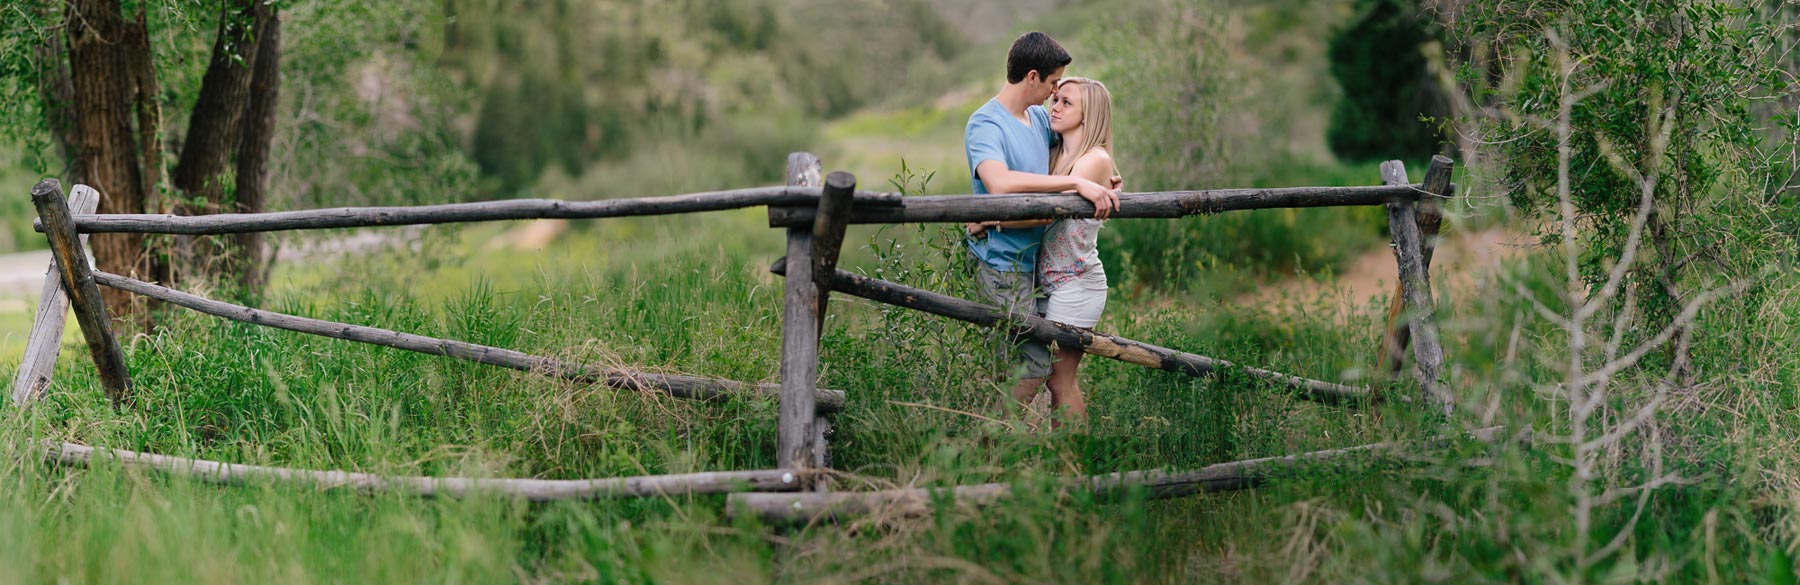 Irivng-Photography-Kerstyn-Korby-Colorado-Engagement-Photographers-006